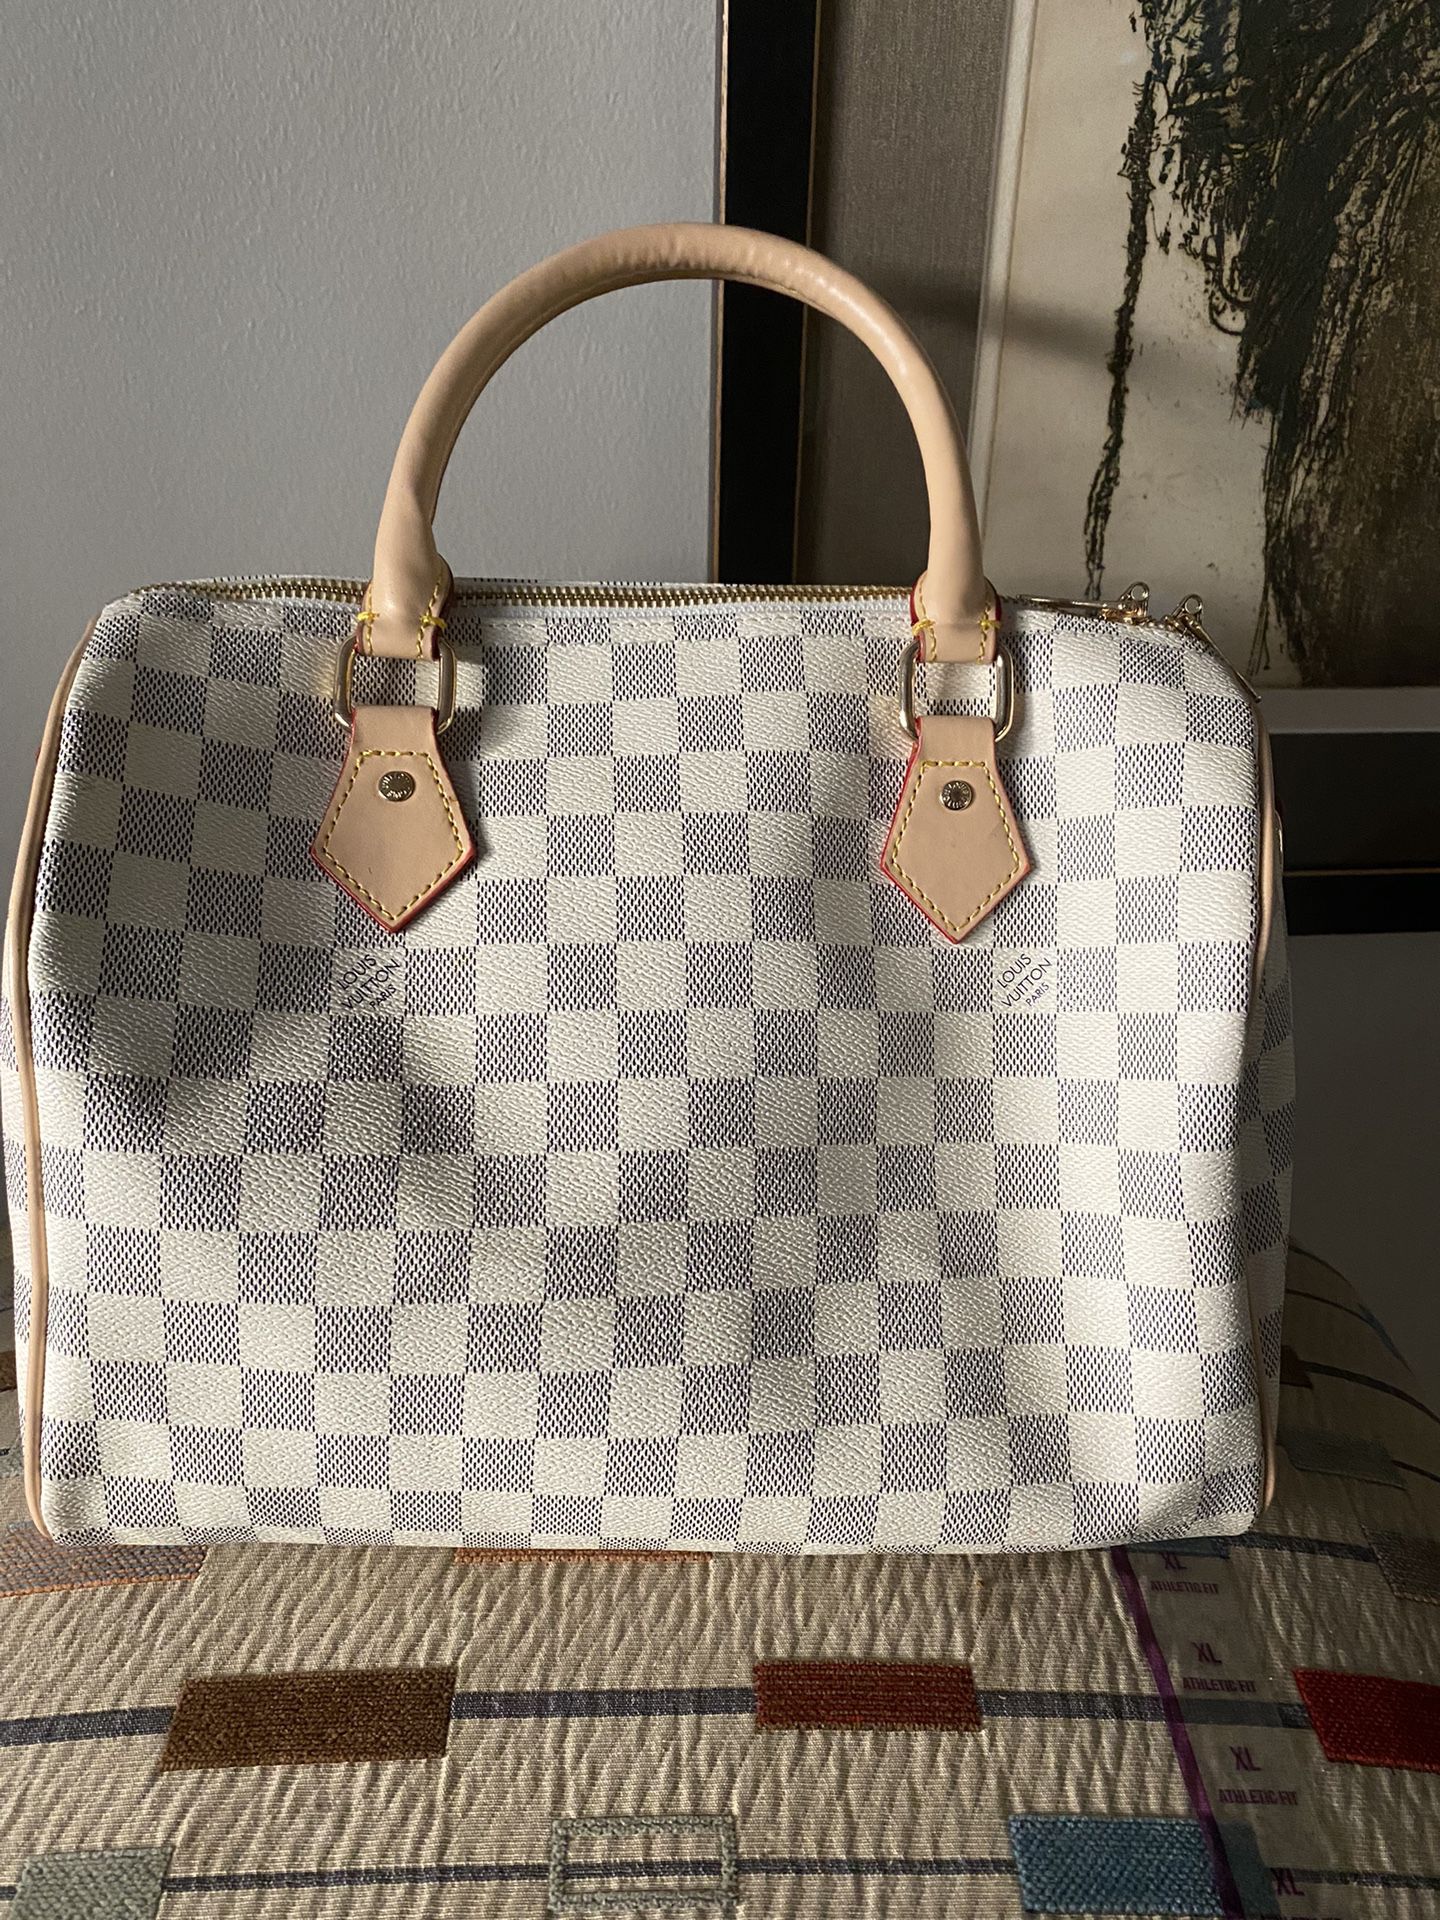 Louis Vuitton Rose Gold Speedy 25 Leather Hand Bag